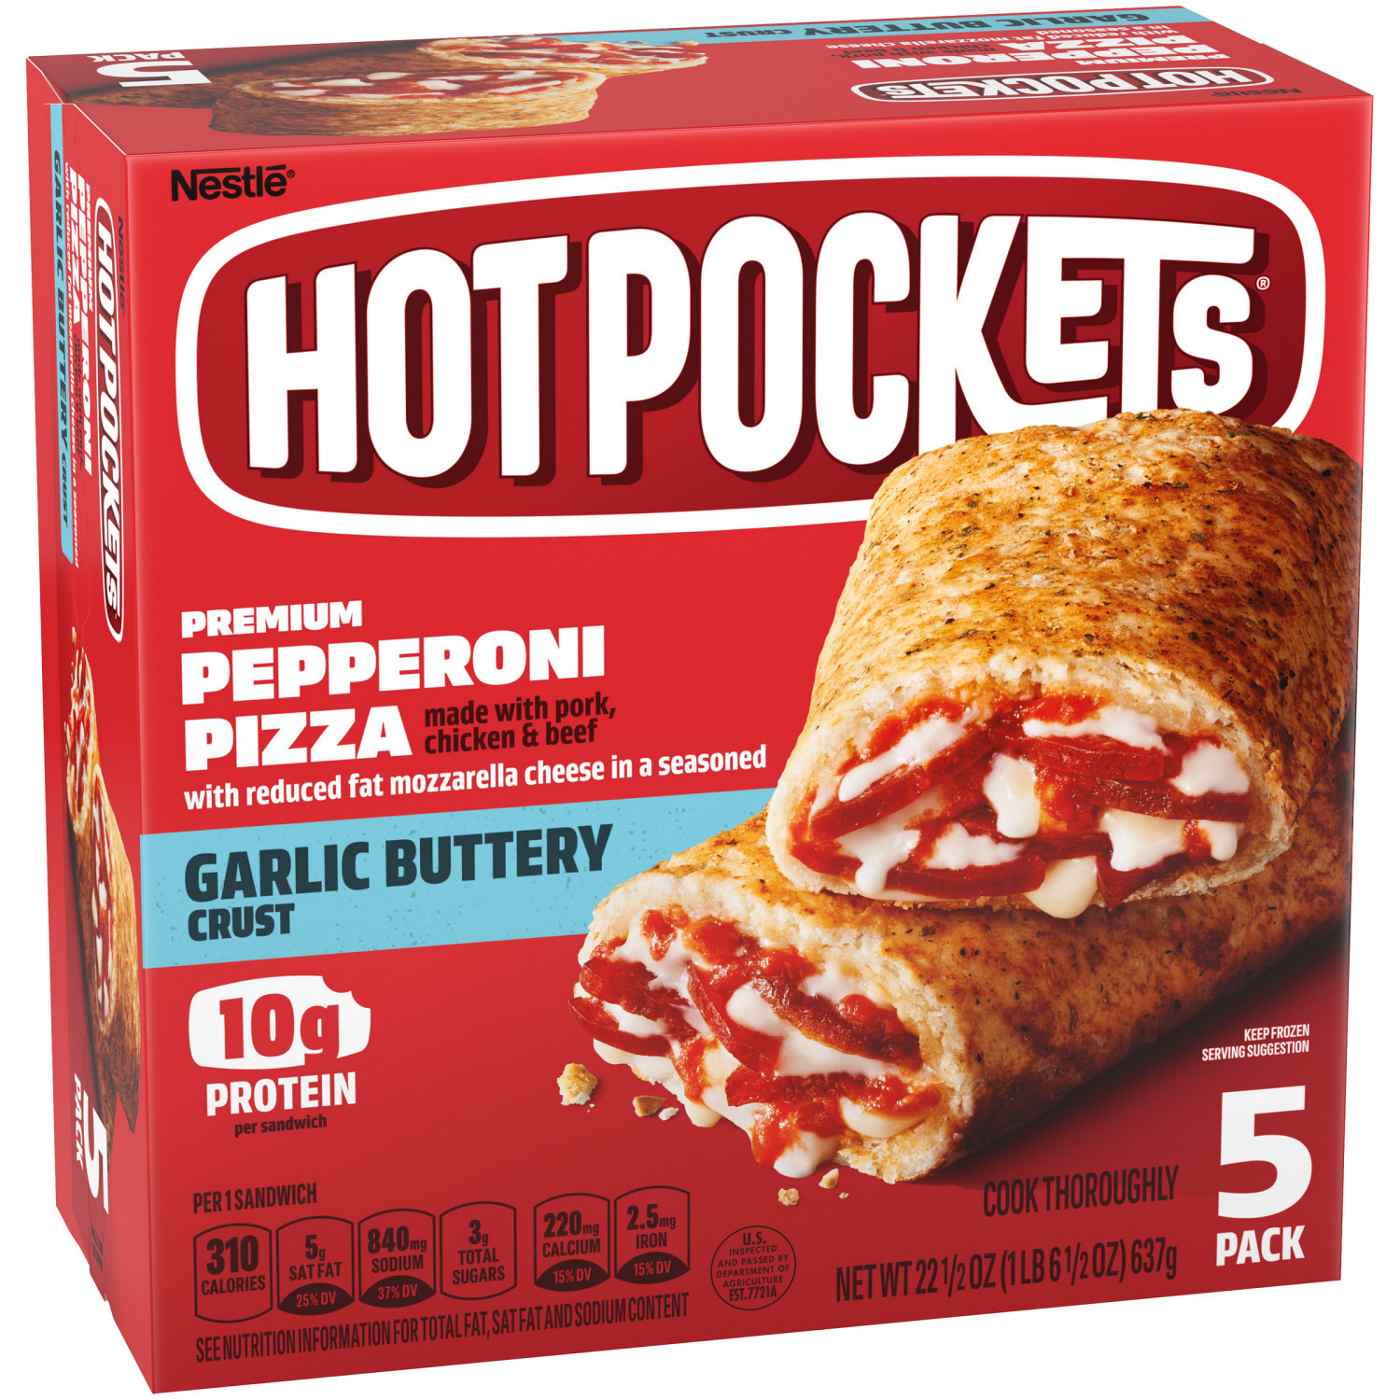 Hot Pockets Pepperoni Pizza Frozen Sandwiches - Garlic Buttery Crust; image 2 of 7